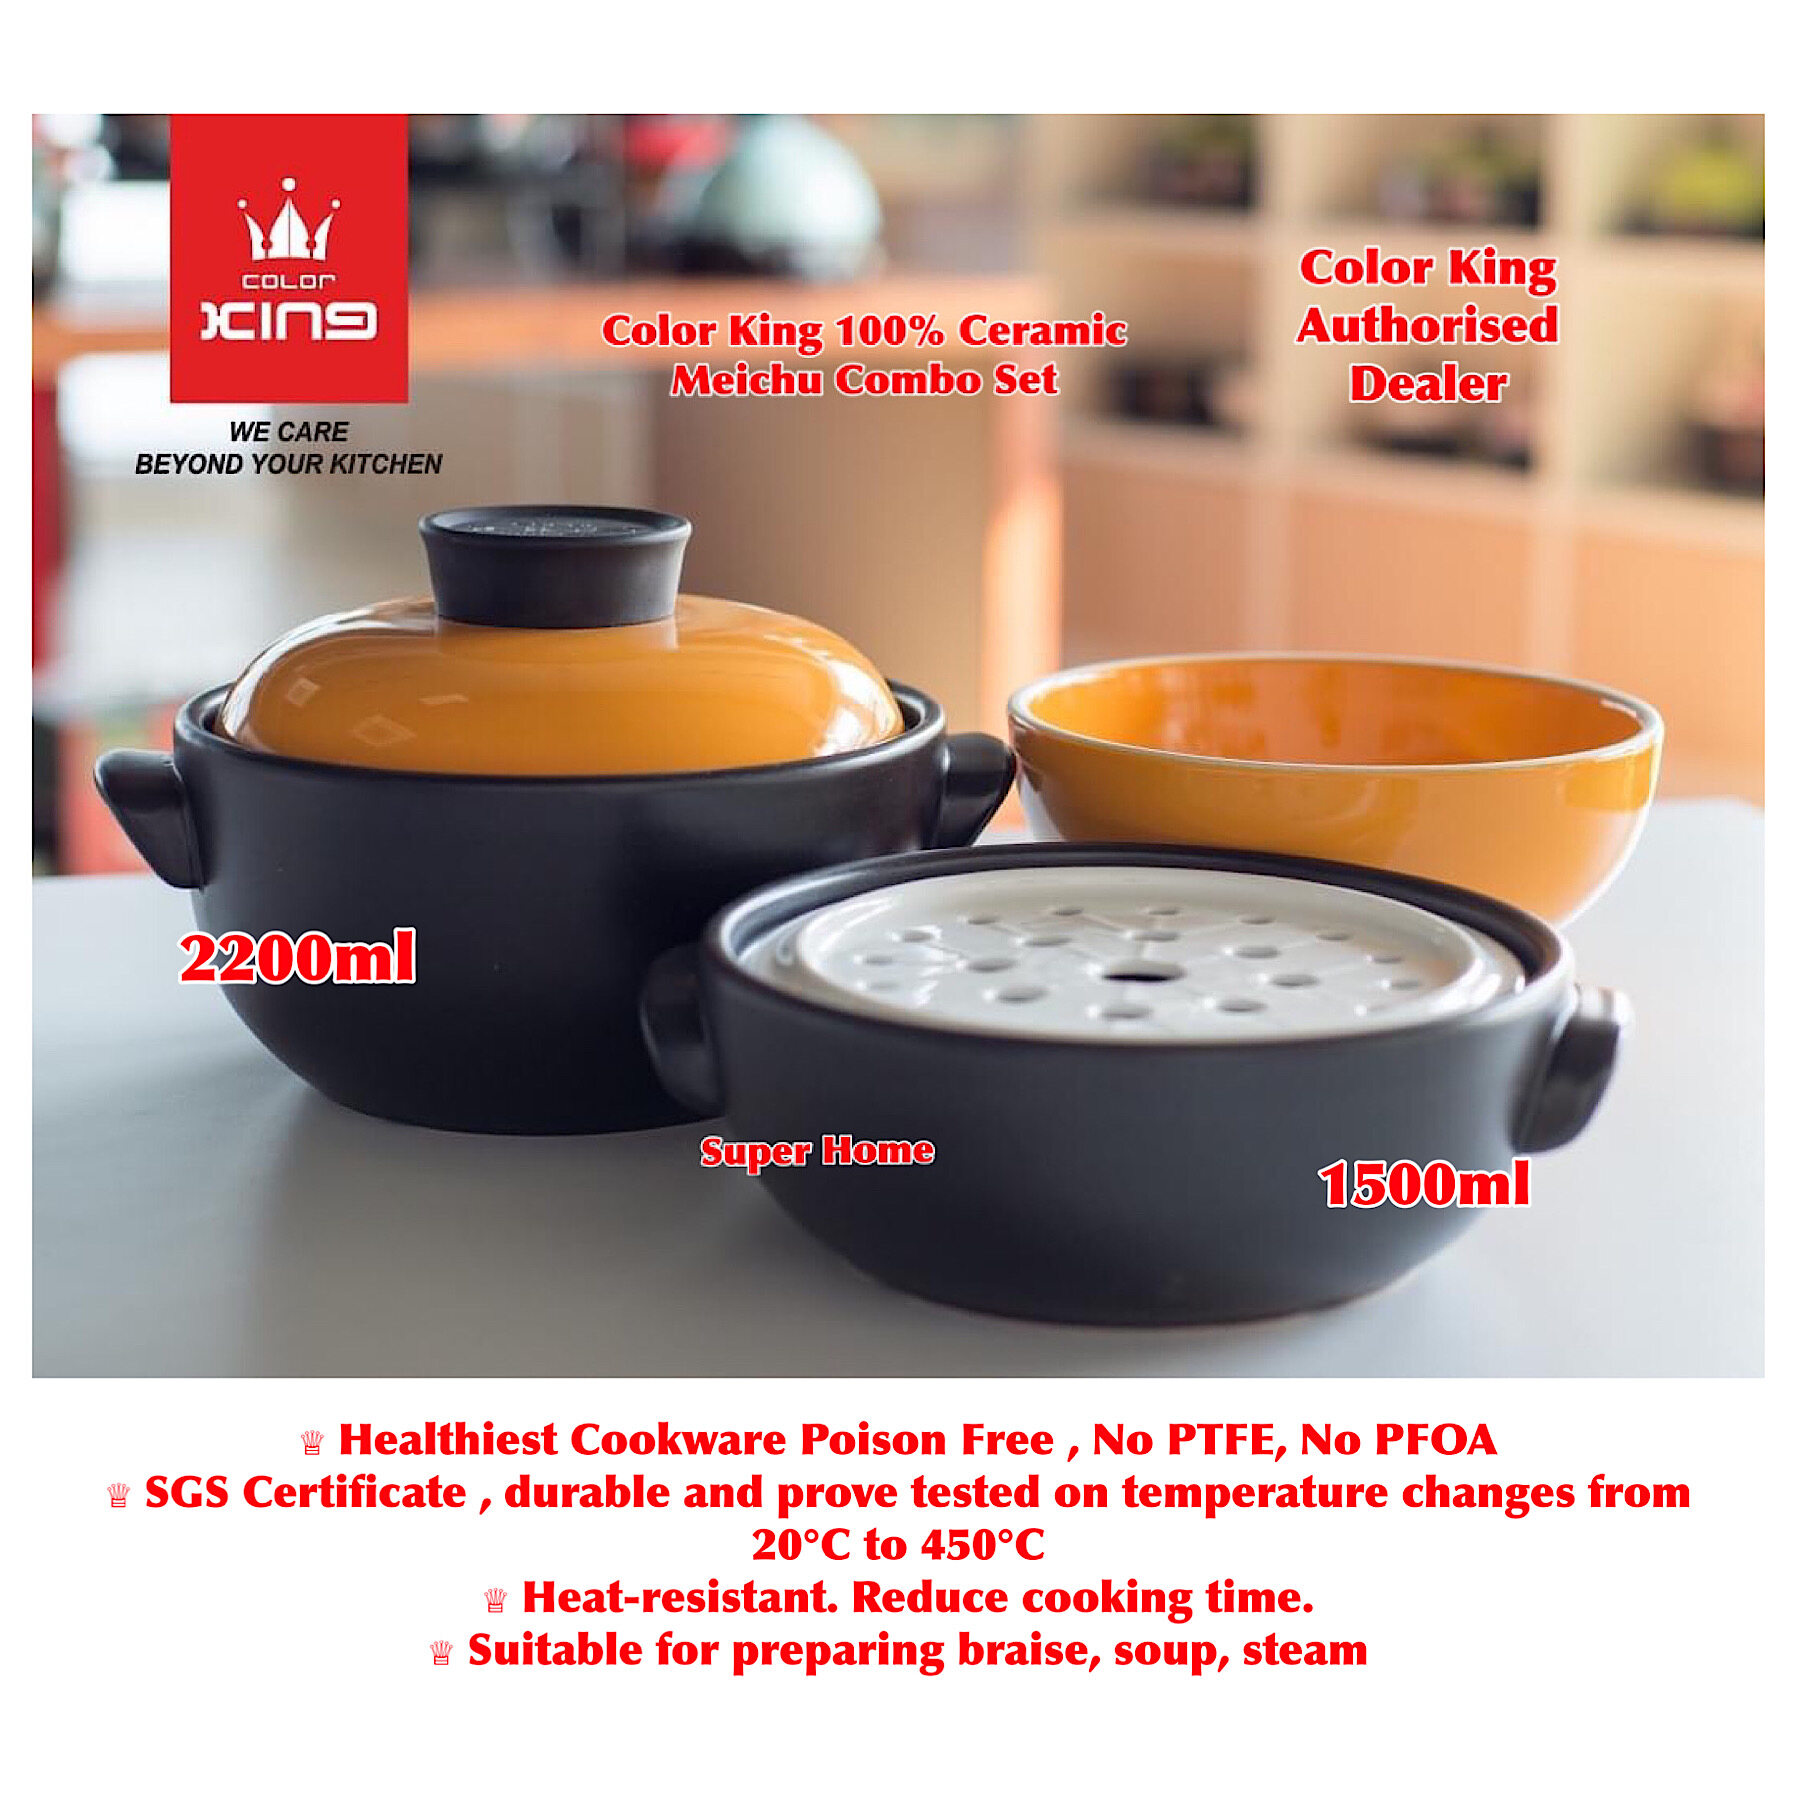 Meichu Combo Set - Color King 2200ML 100% Ceramic Stock Pot + Color King 1500ML 100% Ceramic Braising Pot - (LPT-1805)